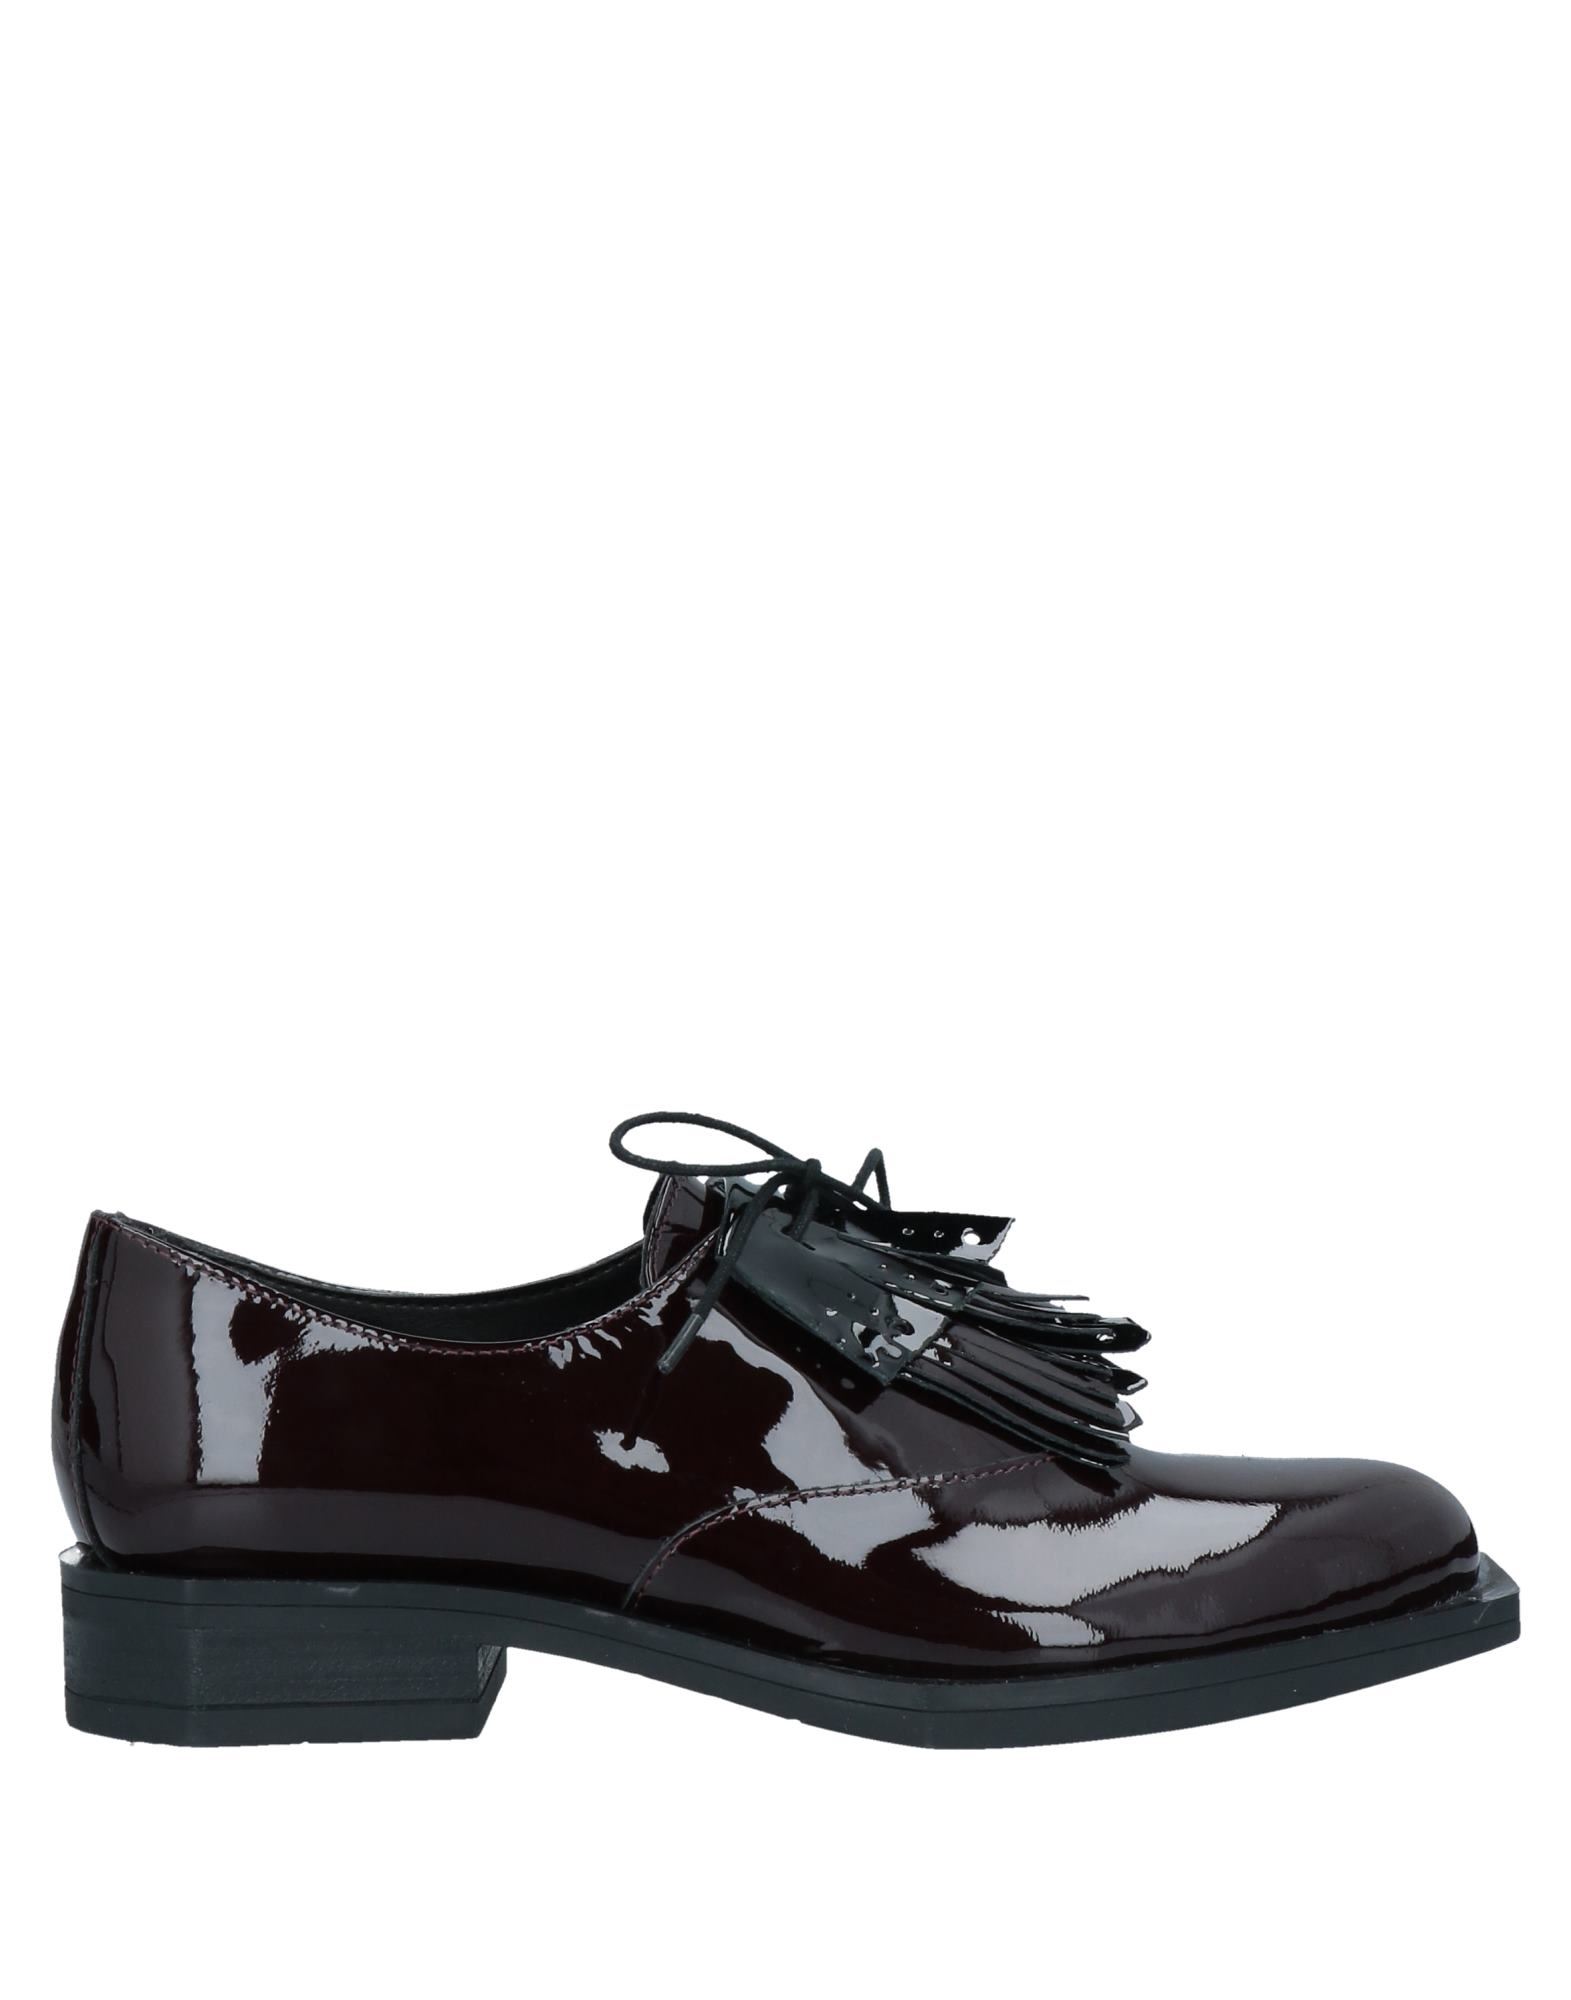 FORMENTINI Lace-up shoes